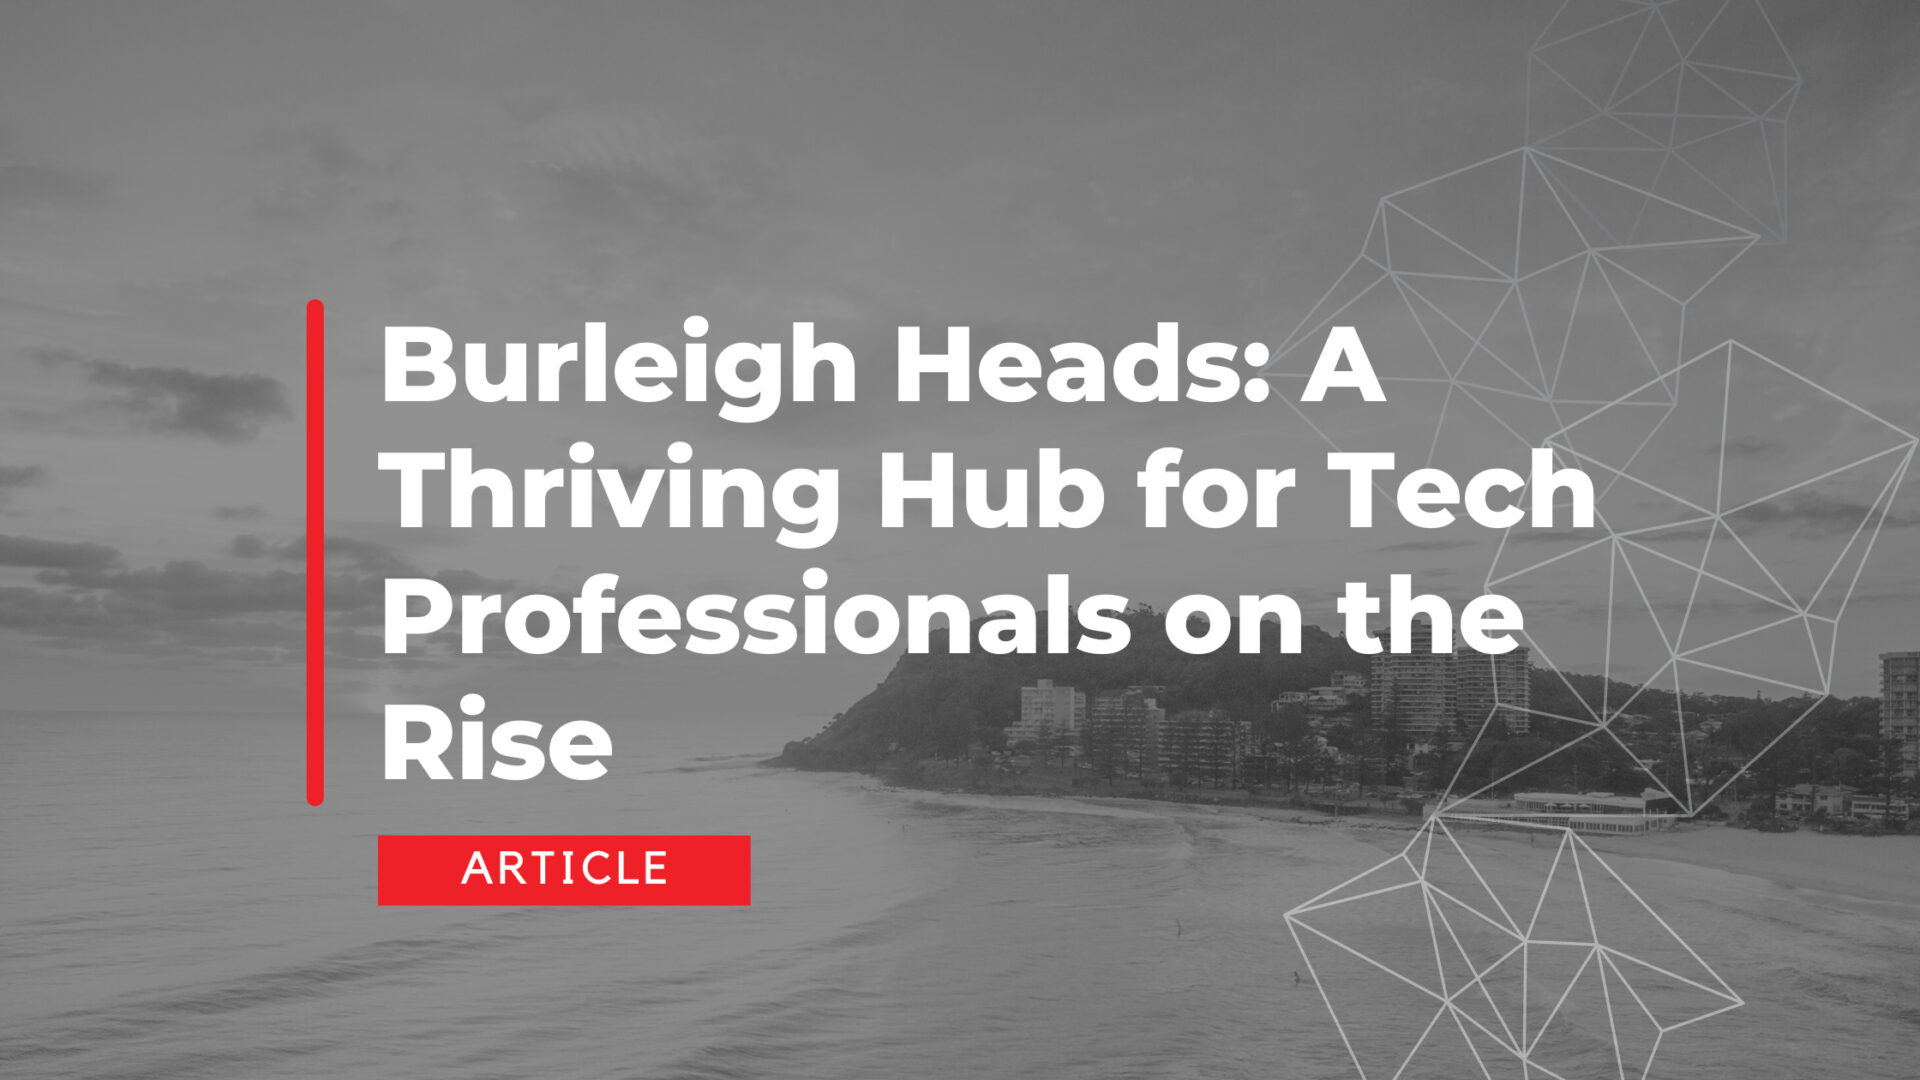 Burleigh Heads: A Thriving Hub for Tech Professionals on the Rise